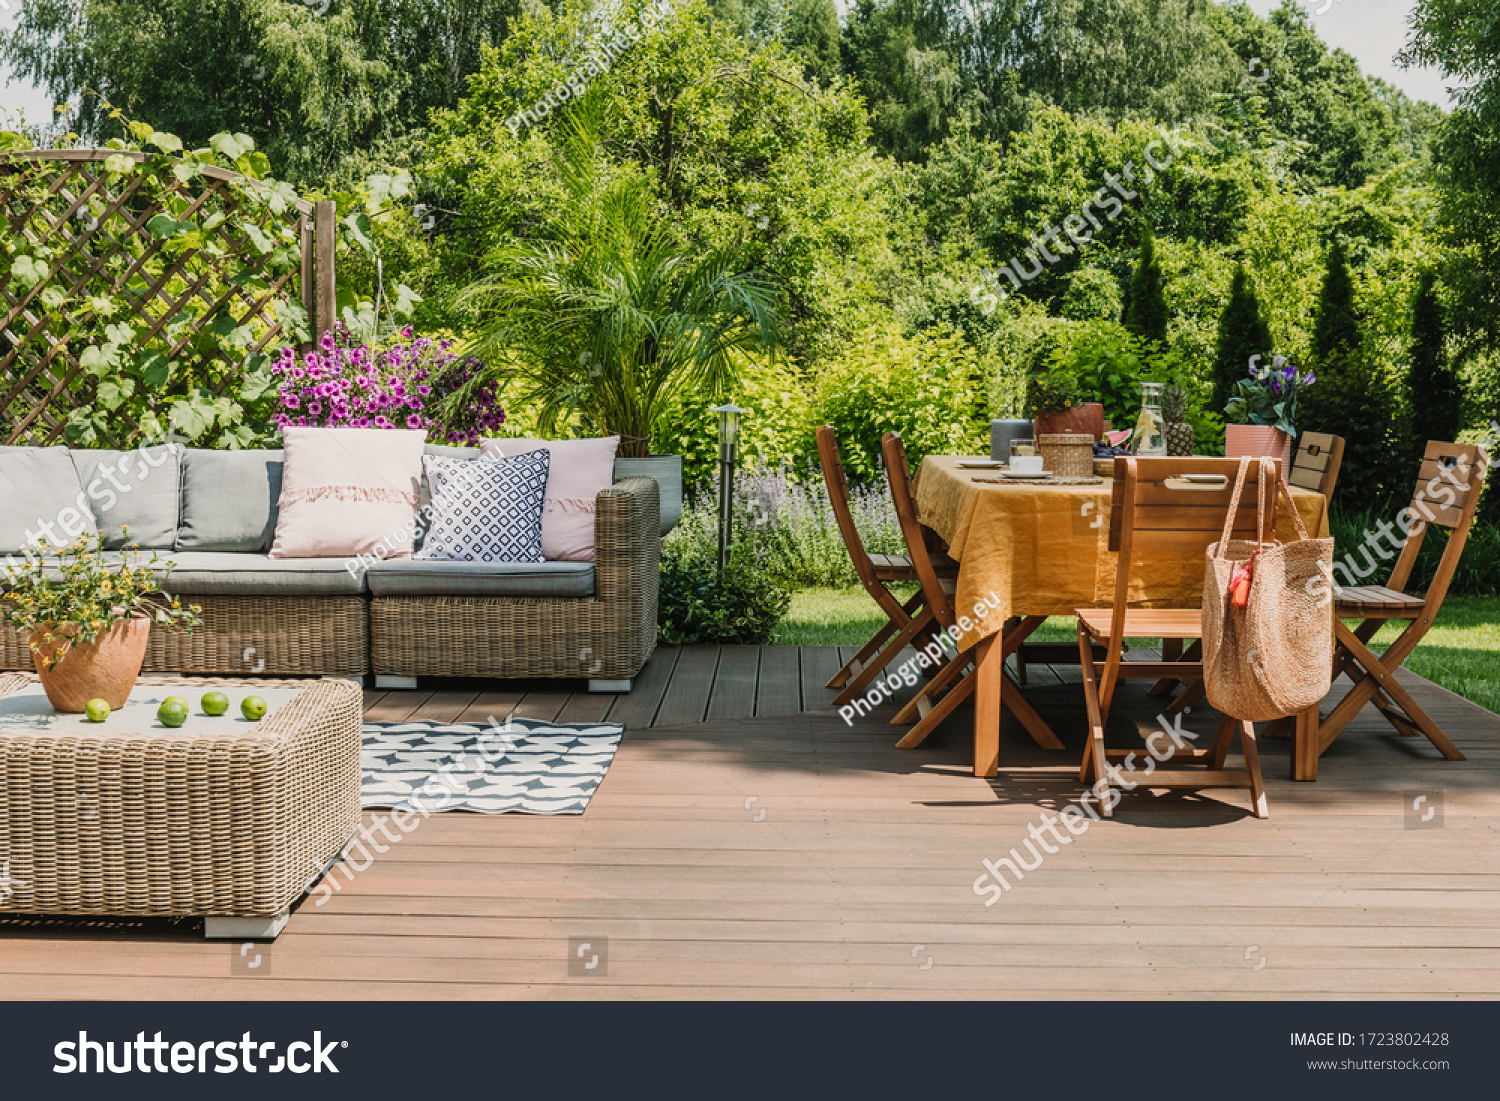 Dining table covered with orange tablecloth standing on wooden terrace in green garden #1723802428